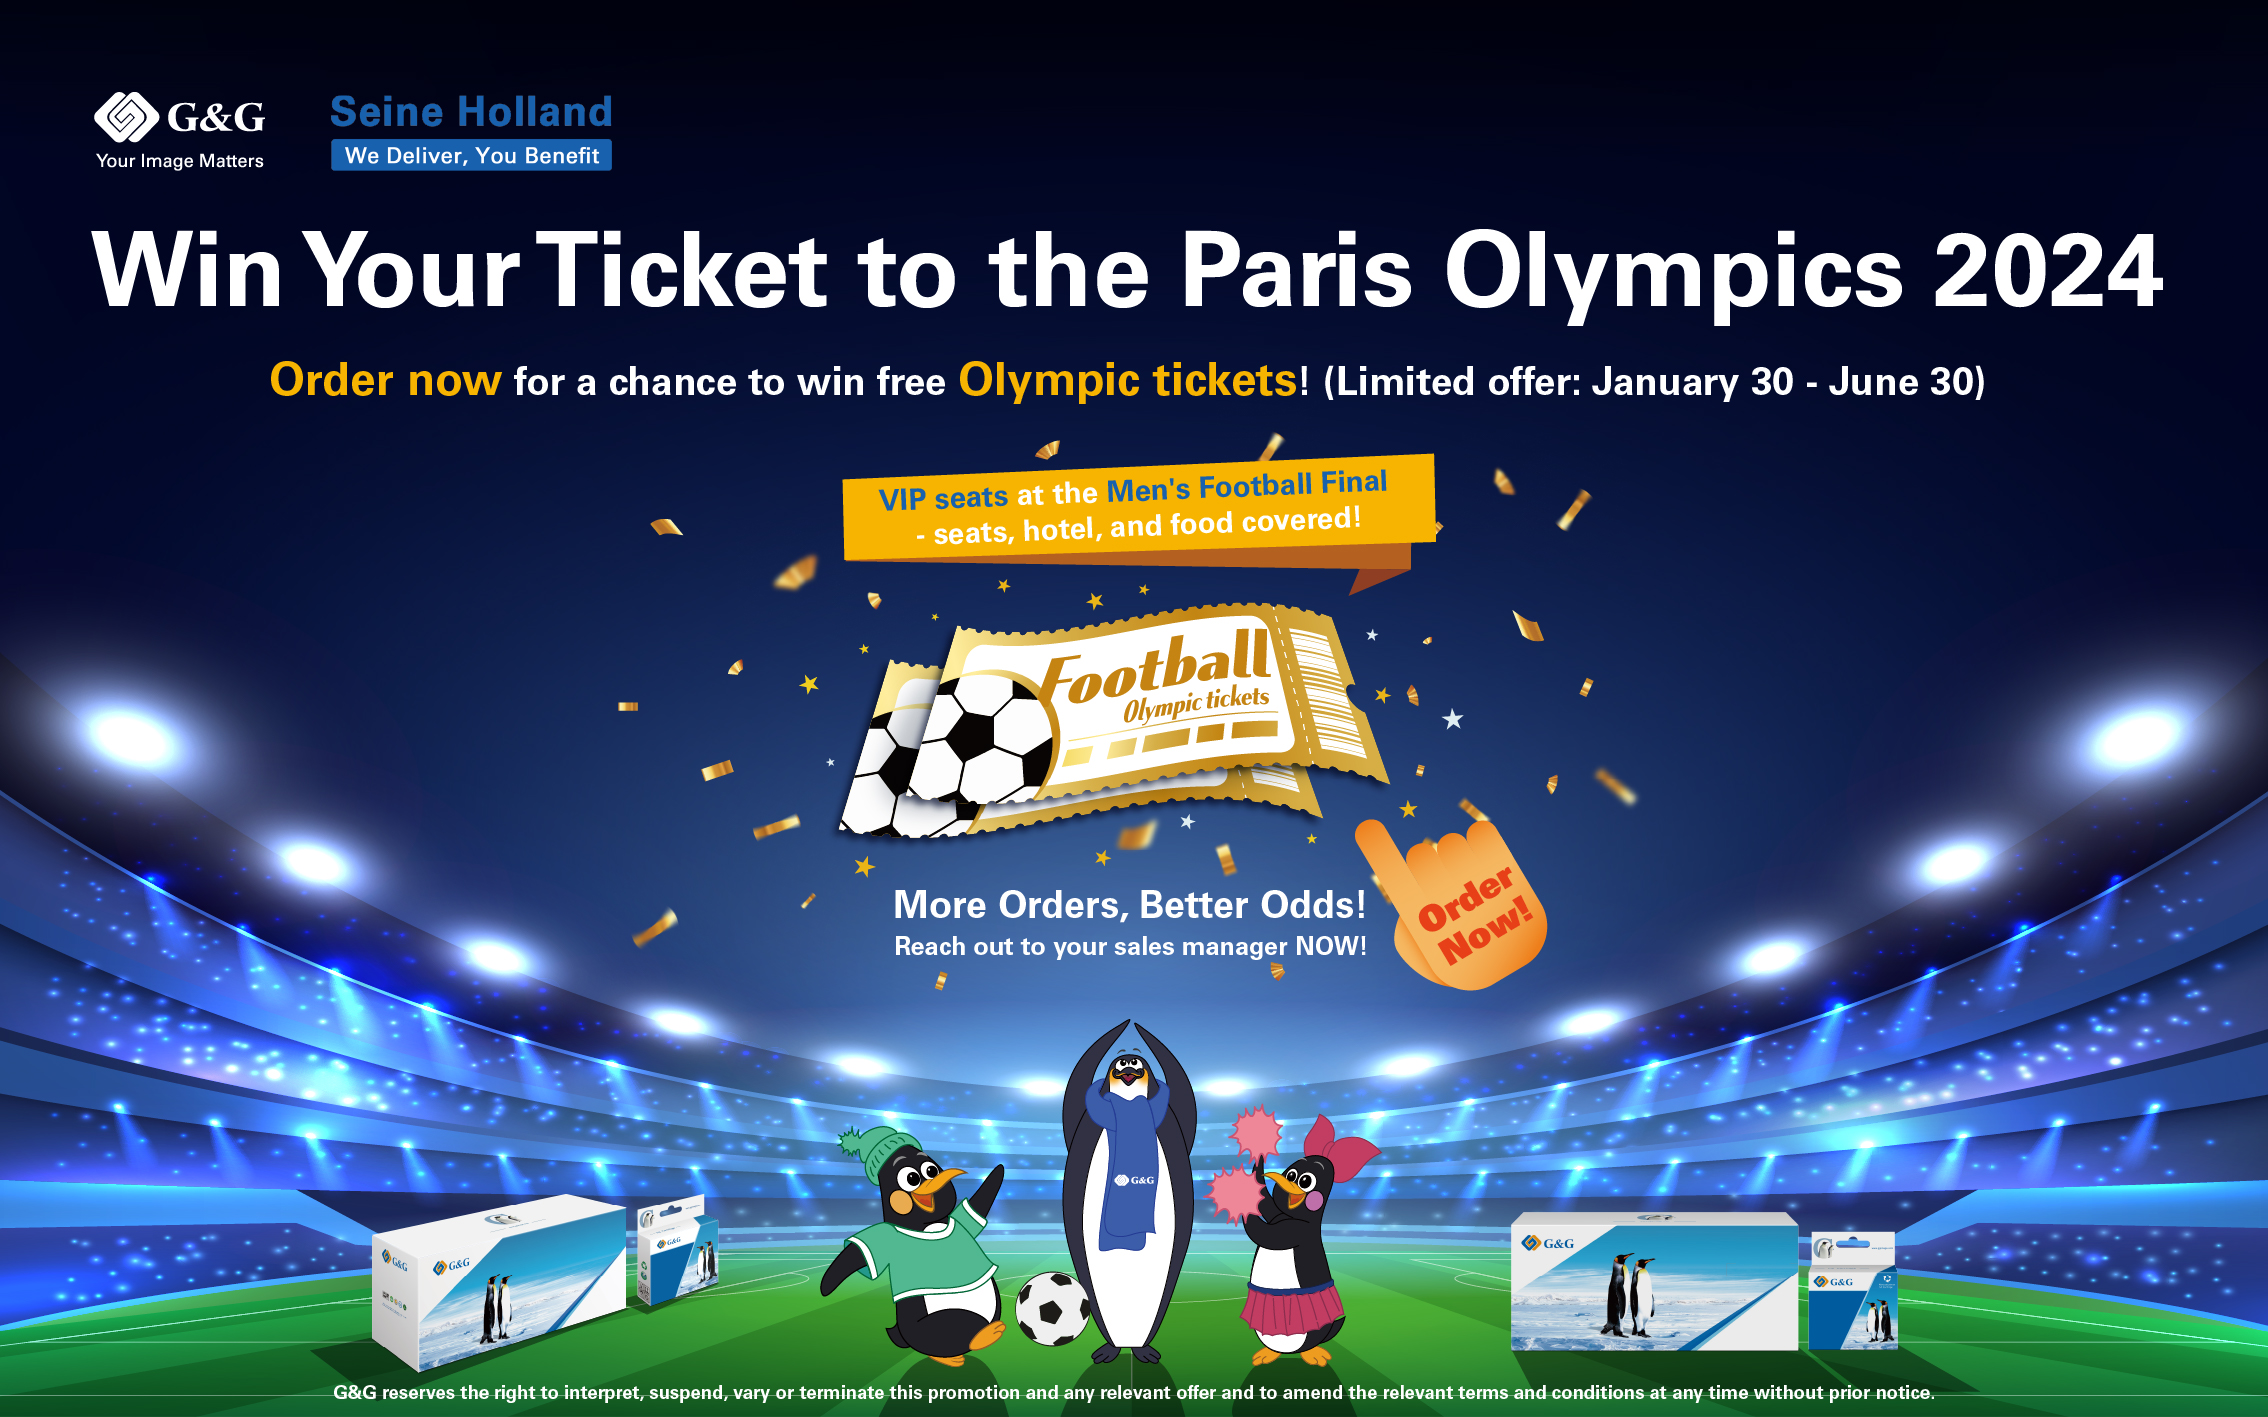 Win Your Ticket to Paris Olympics